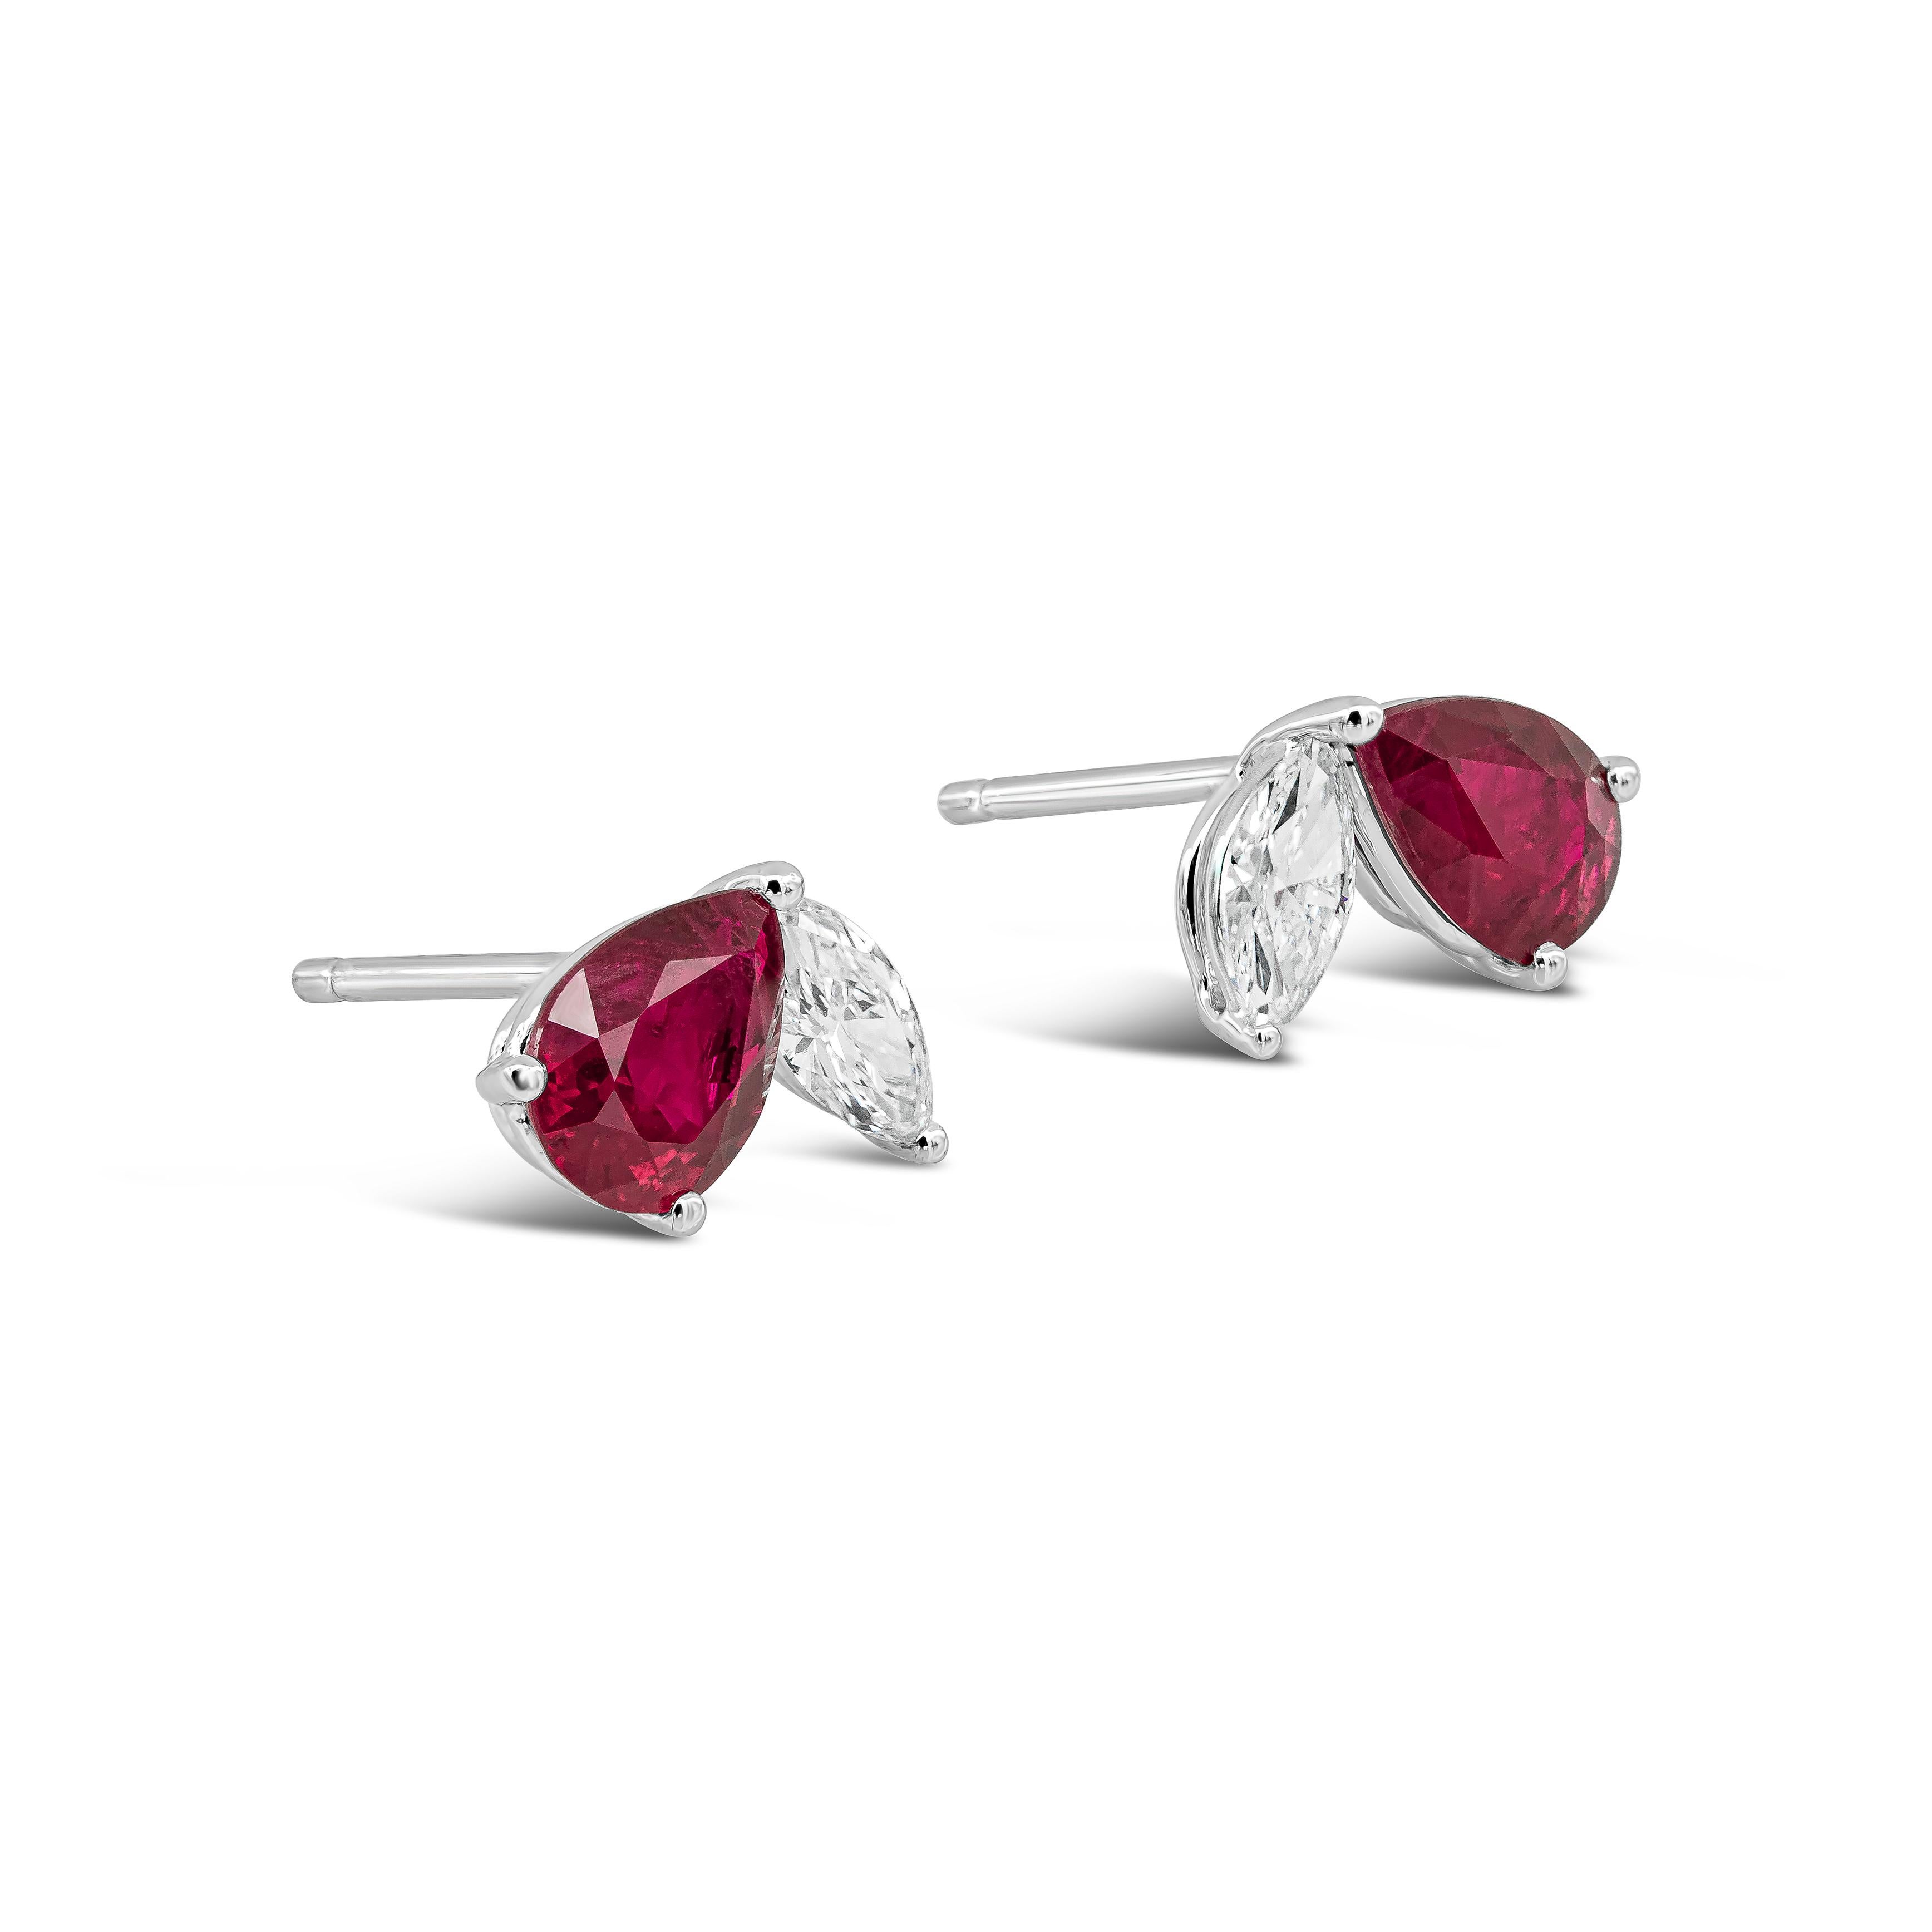 A chic pair of stud earrings perfect for everyday wear. Each earring features a pear shape ruby and diamond pear, set in 18 karat white gold. Rubies weigh 1.67 carats total; diamonds weigh 0.41 carats total.

Style available in different price